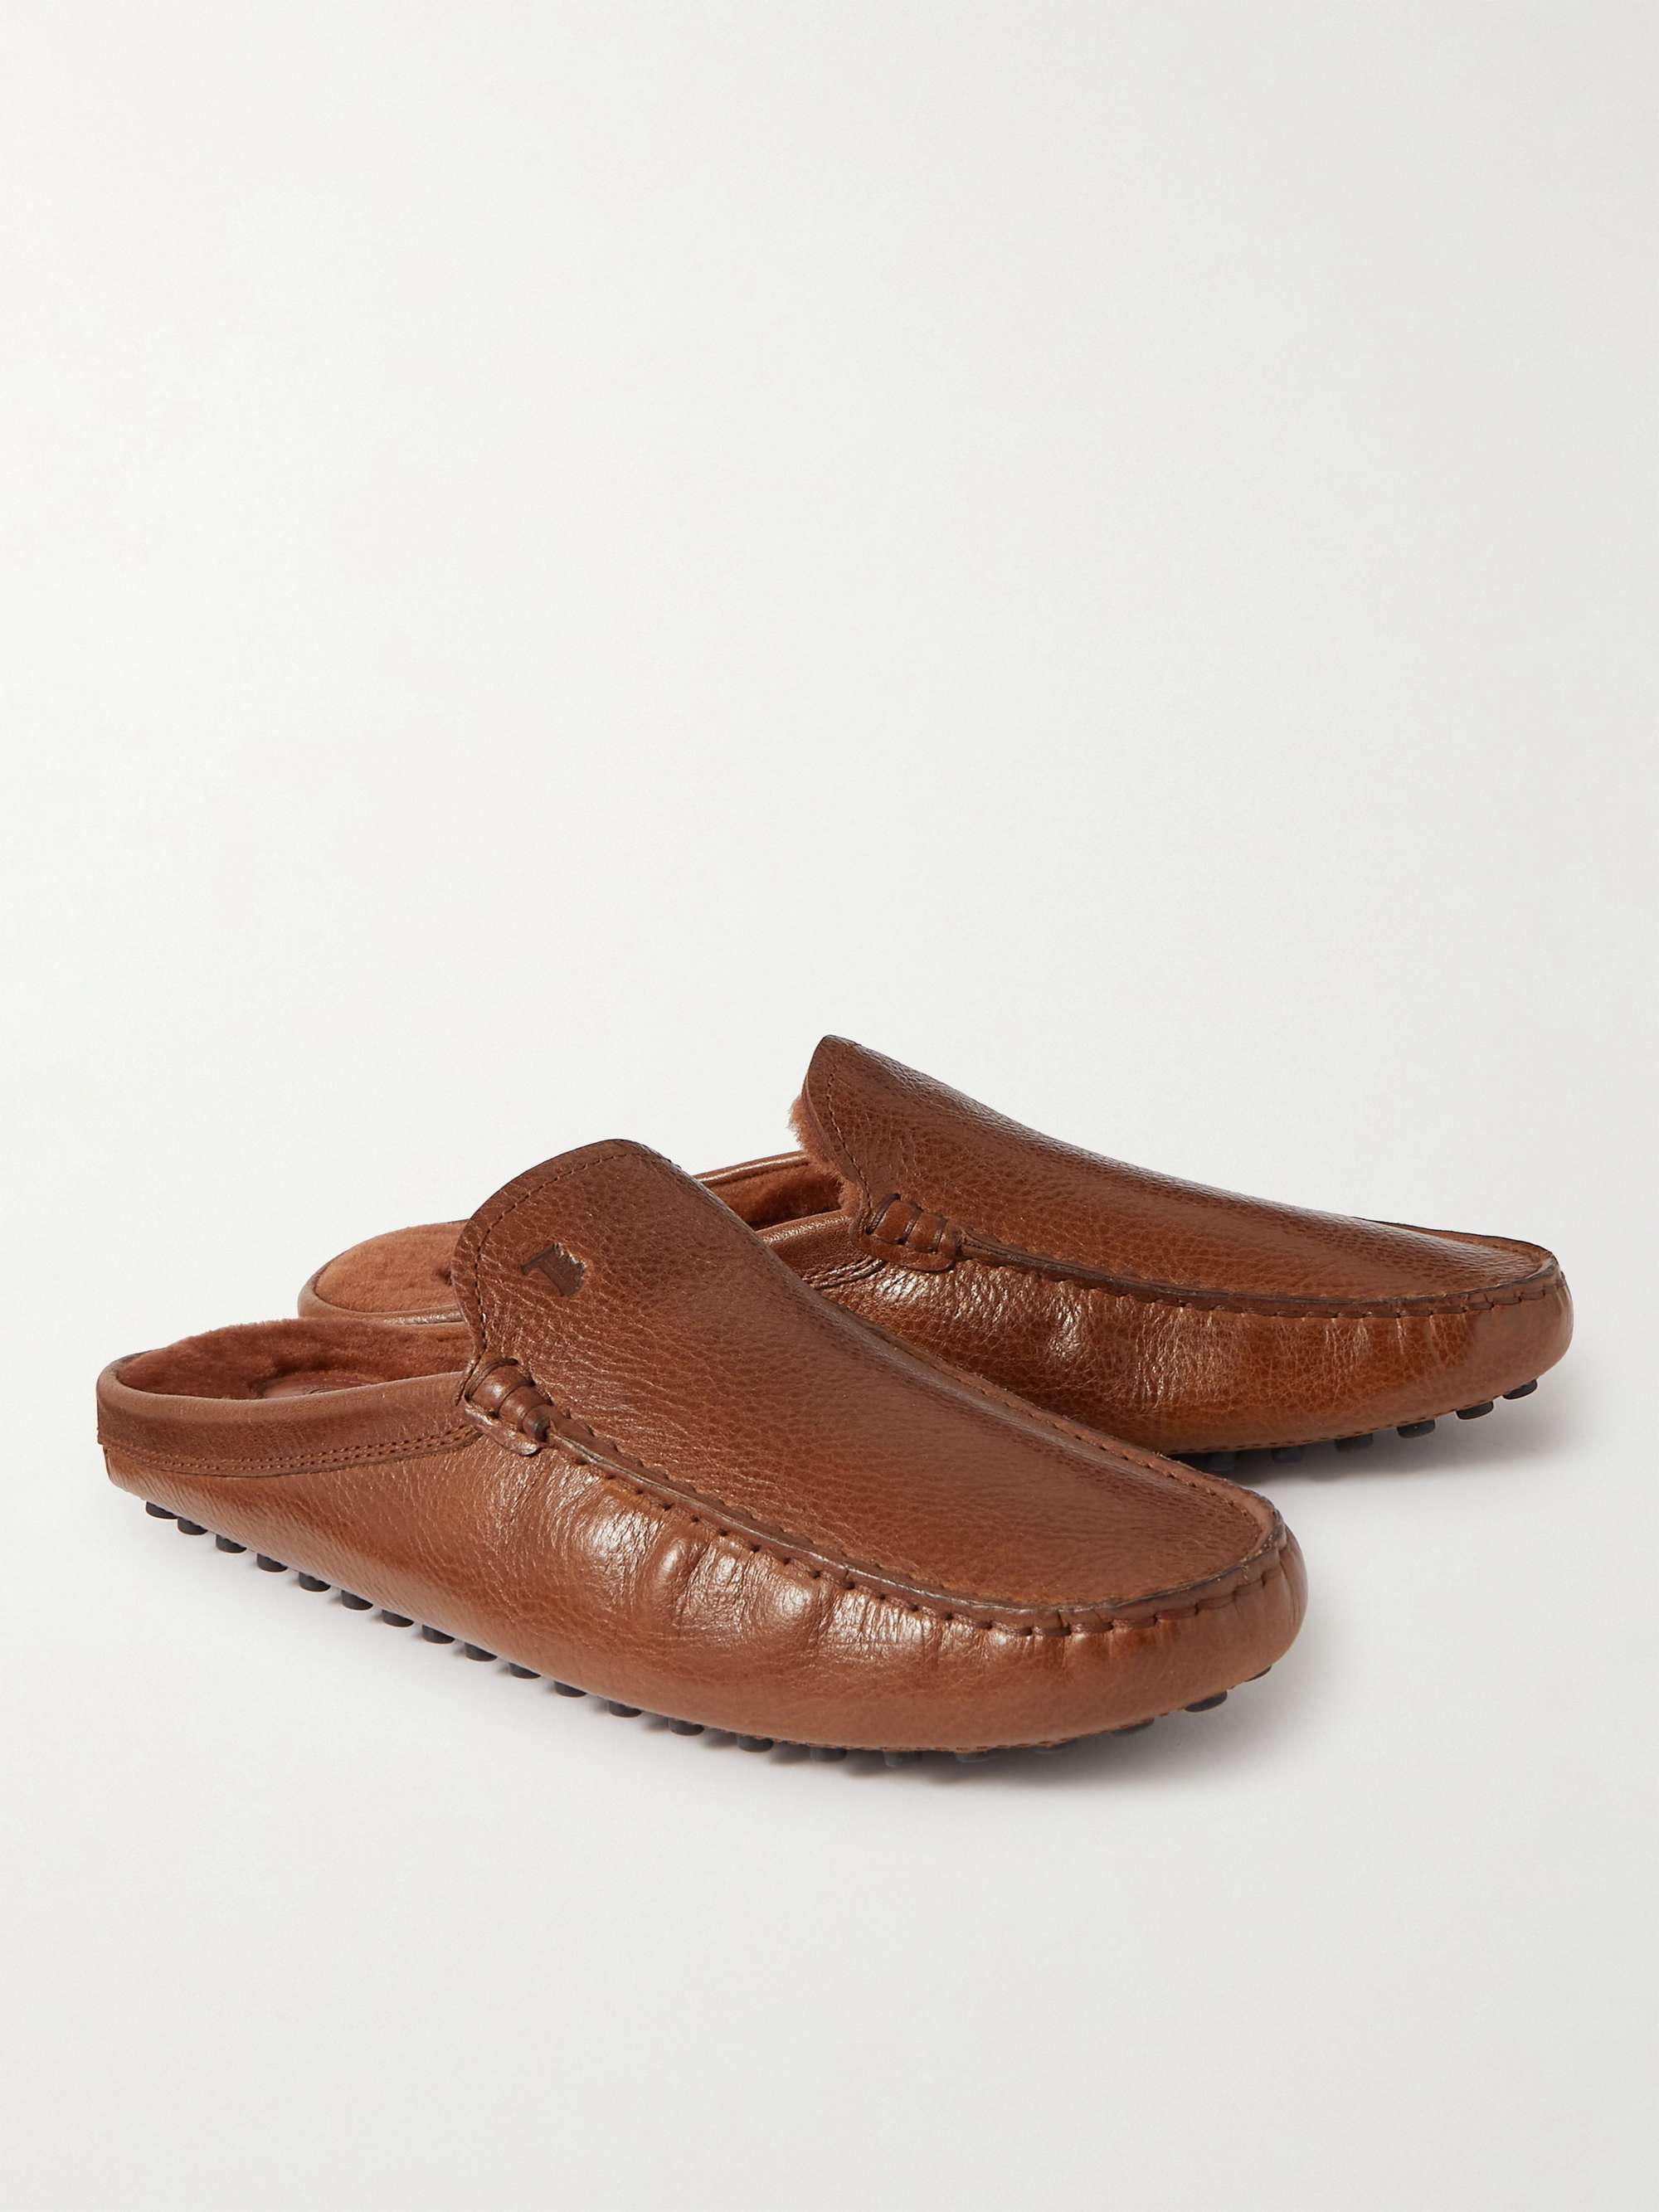 Brown Shearling-Lined Full-Grain Leather Slippers | TOD'S | MR PORTER